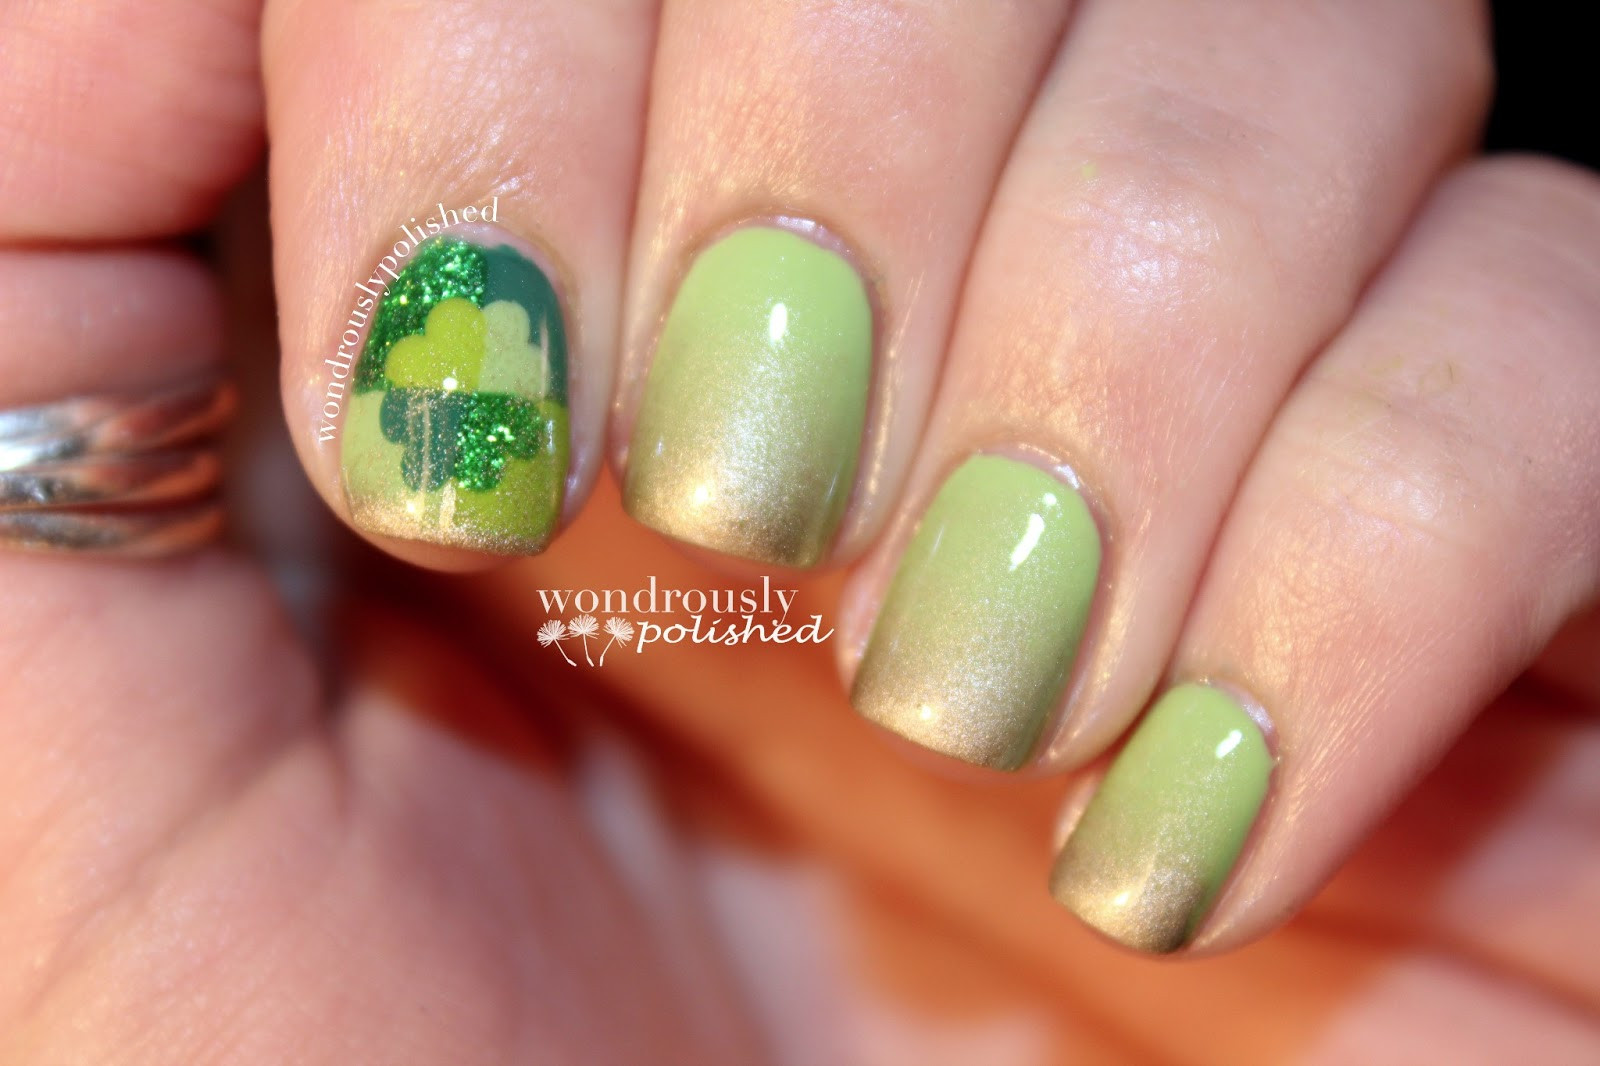 March Nail Designs
 Wondrously Polished March Nail Art Challenge Day 4 & 5